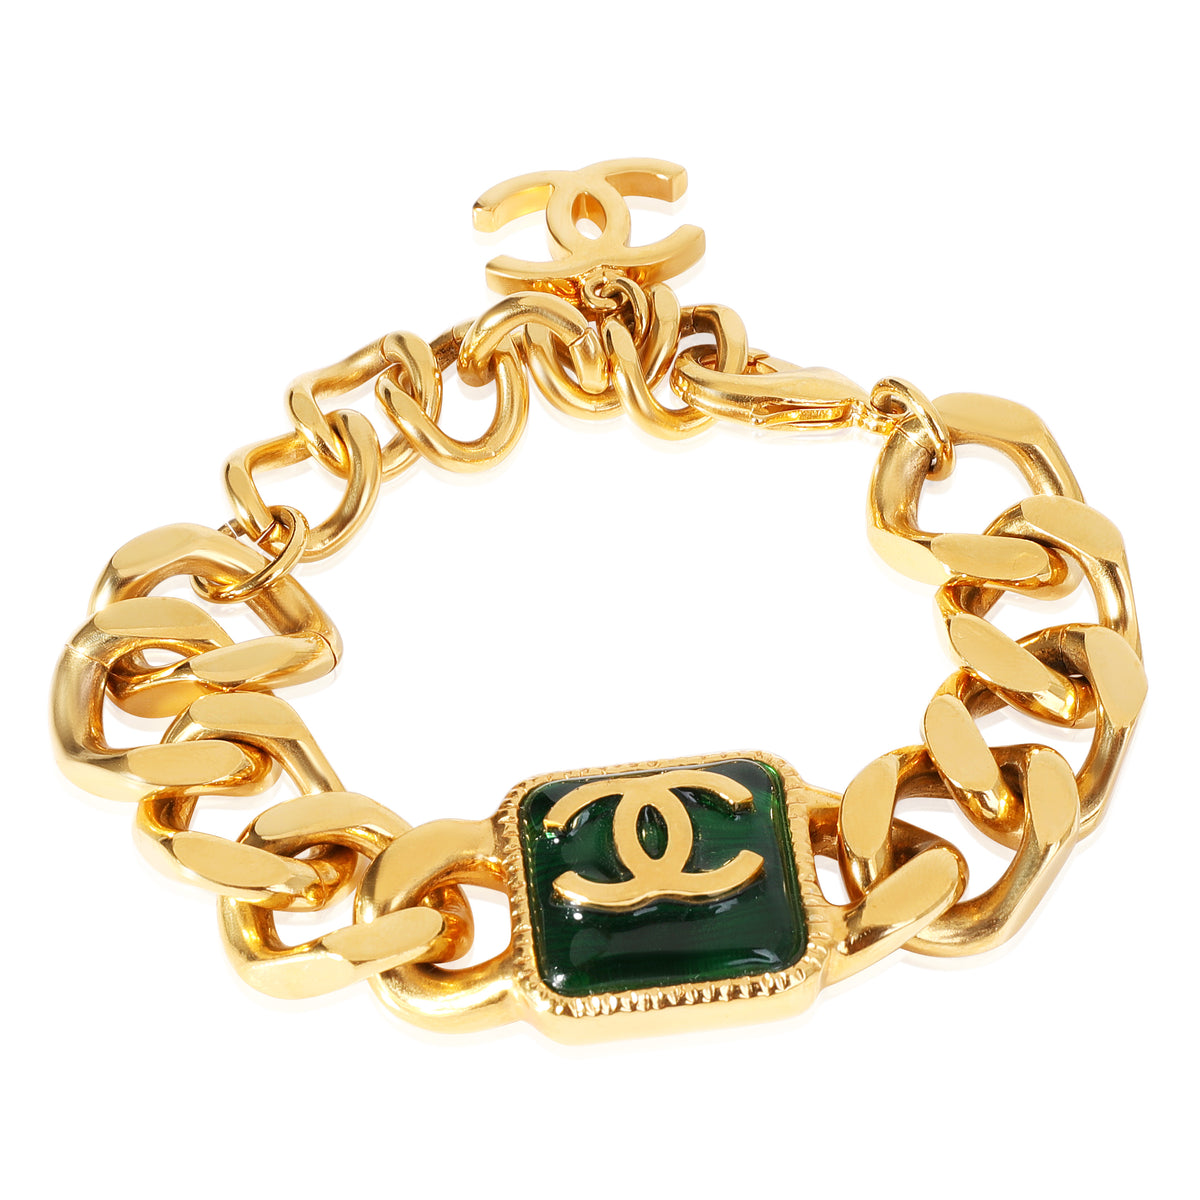 Chanel Runway Black Leather And Gold Tone Metal Chain Link Necklace With c  H A N E L And Signature